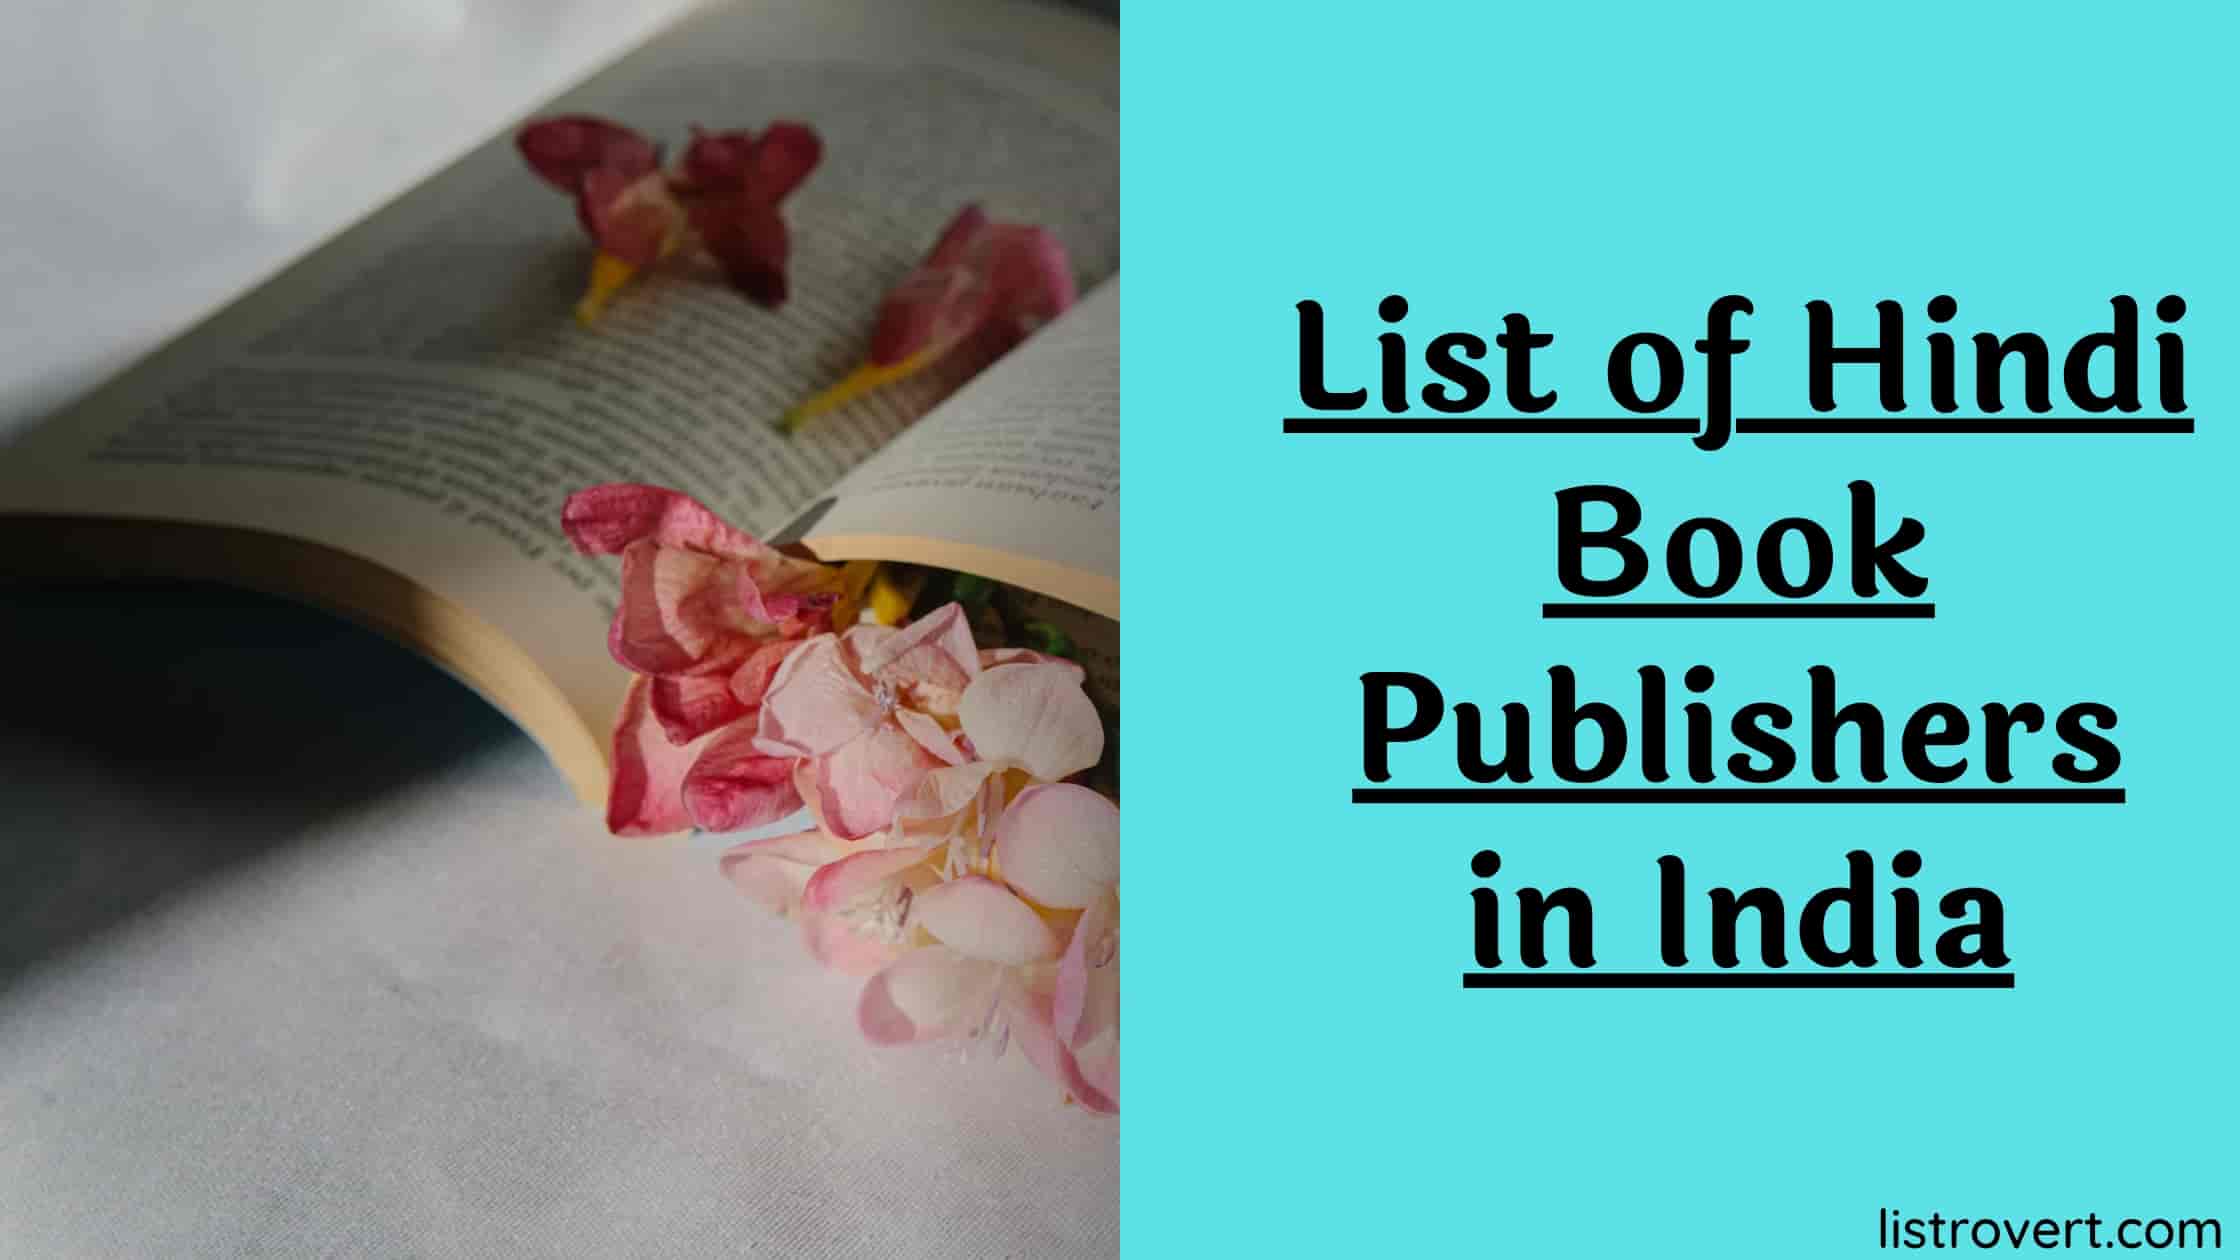 Hindi Book Publishers List in India